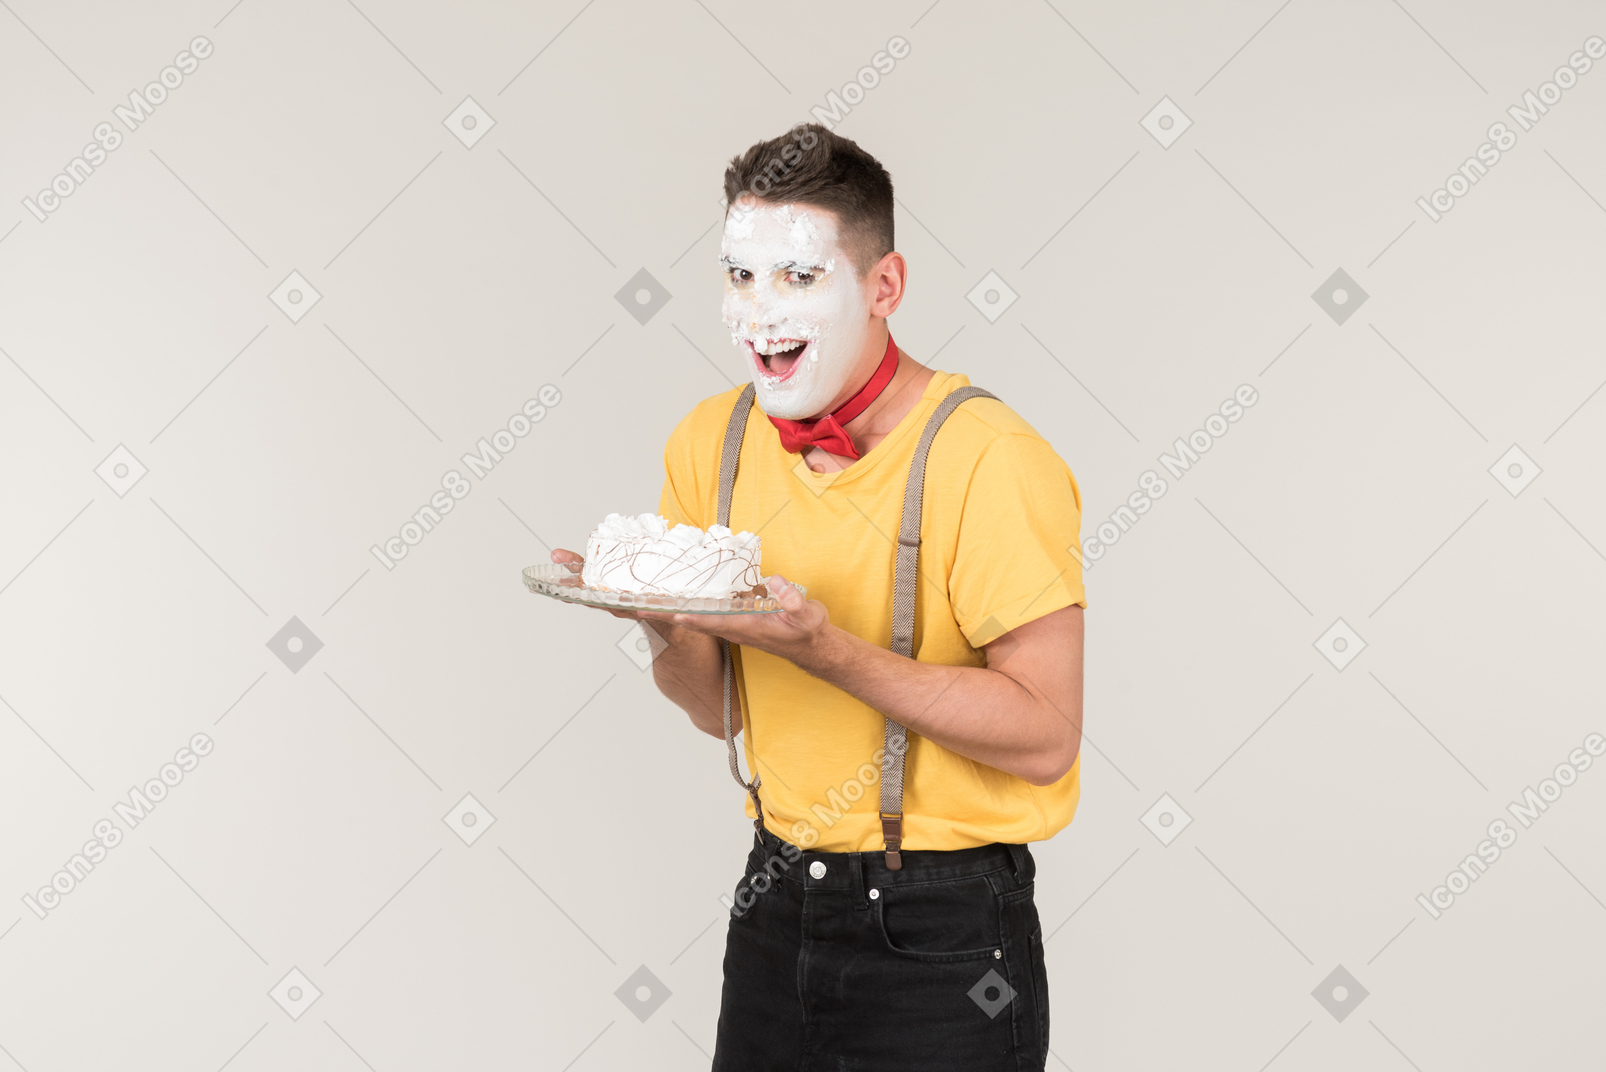 Male clown with cake cream on his face holding a cake